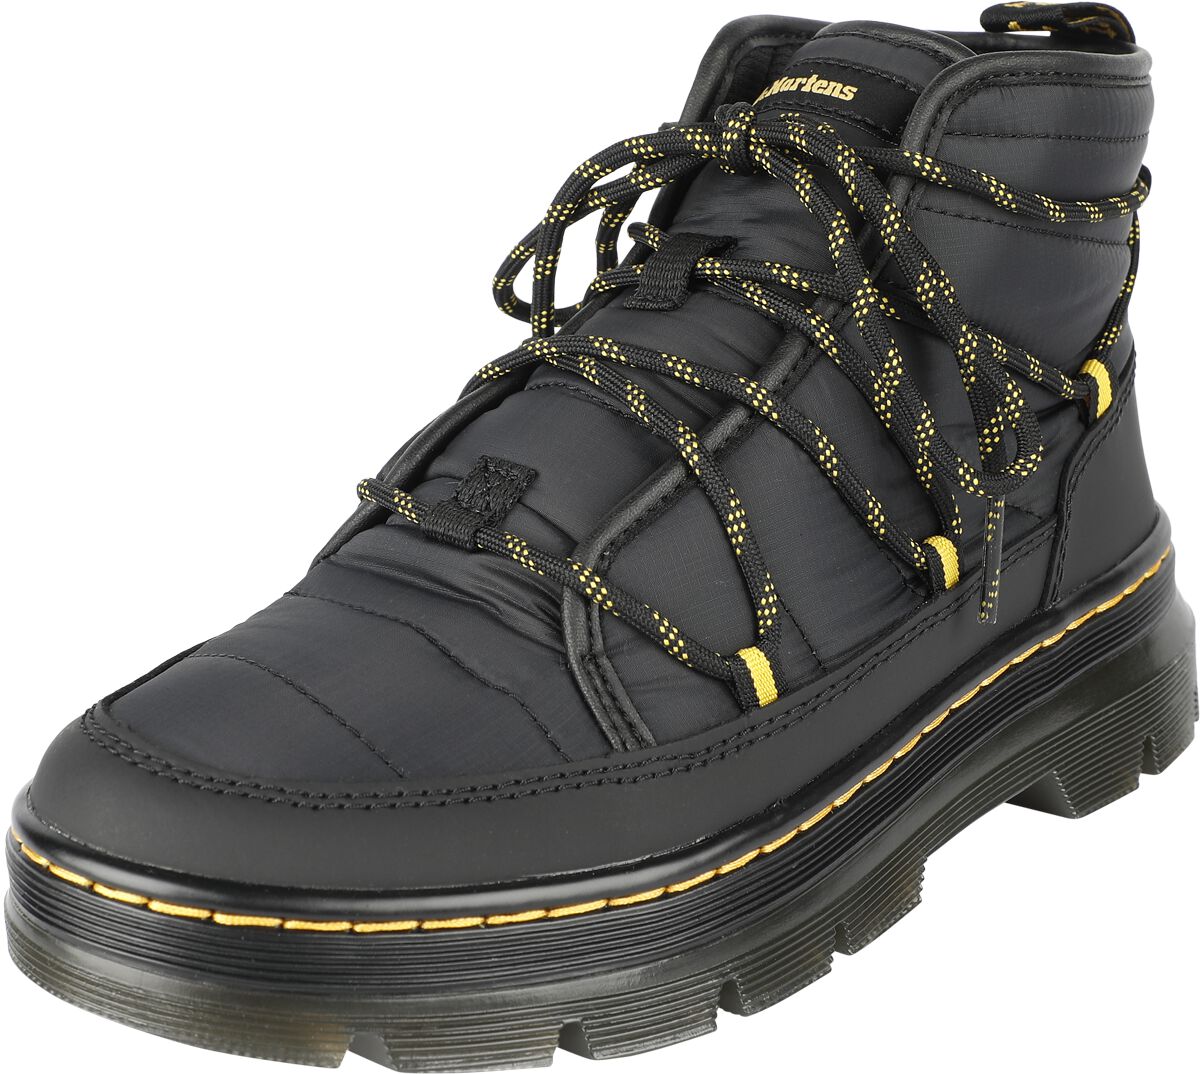 Dr. Martens Combs W Padded Boot schwarz in EU42